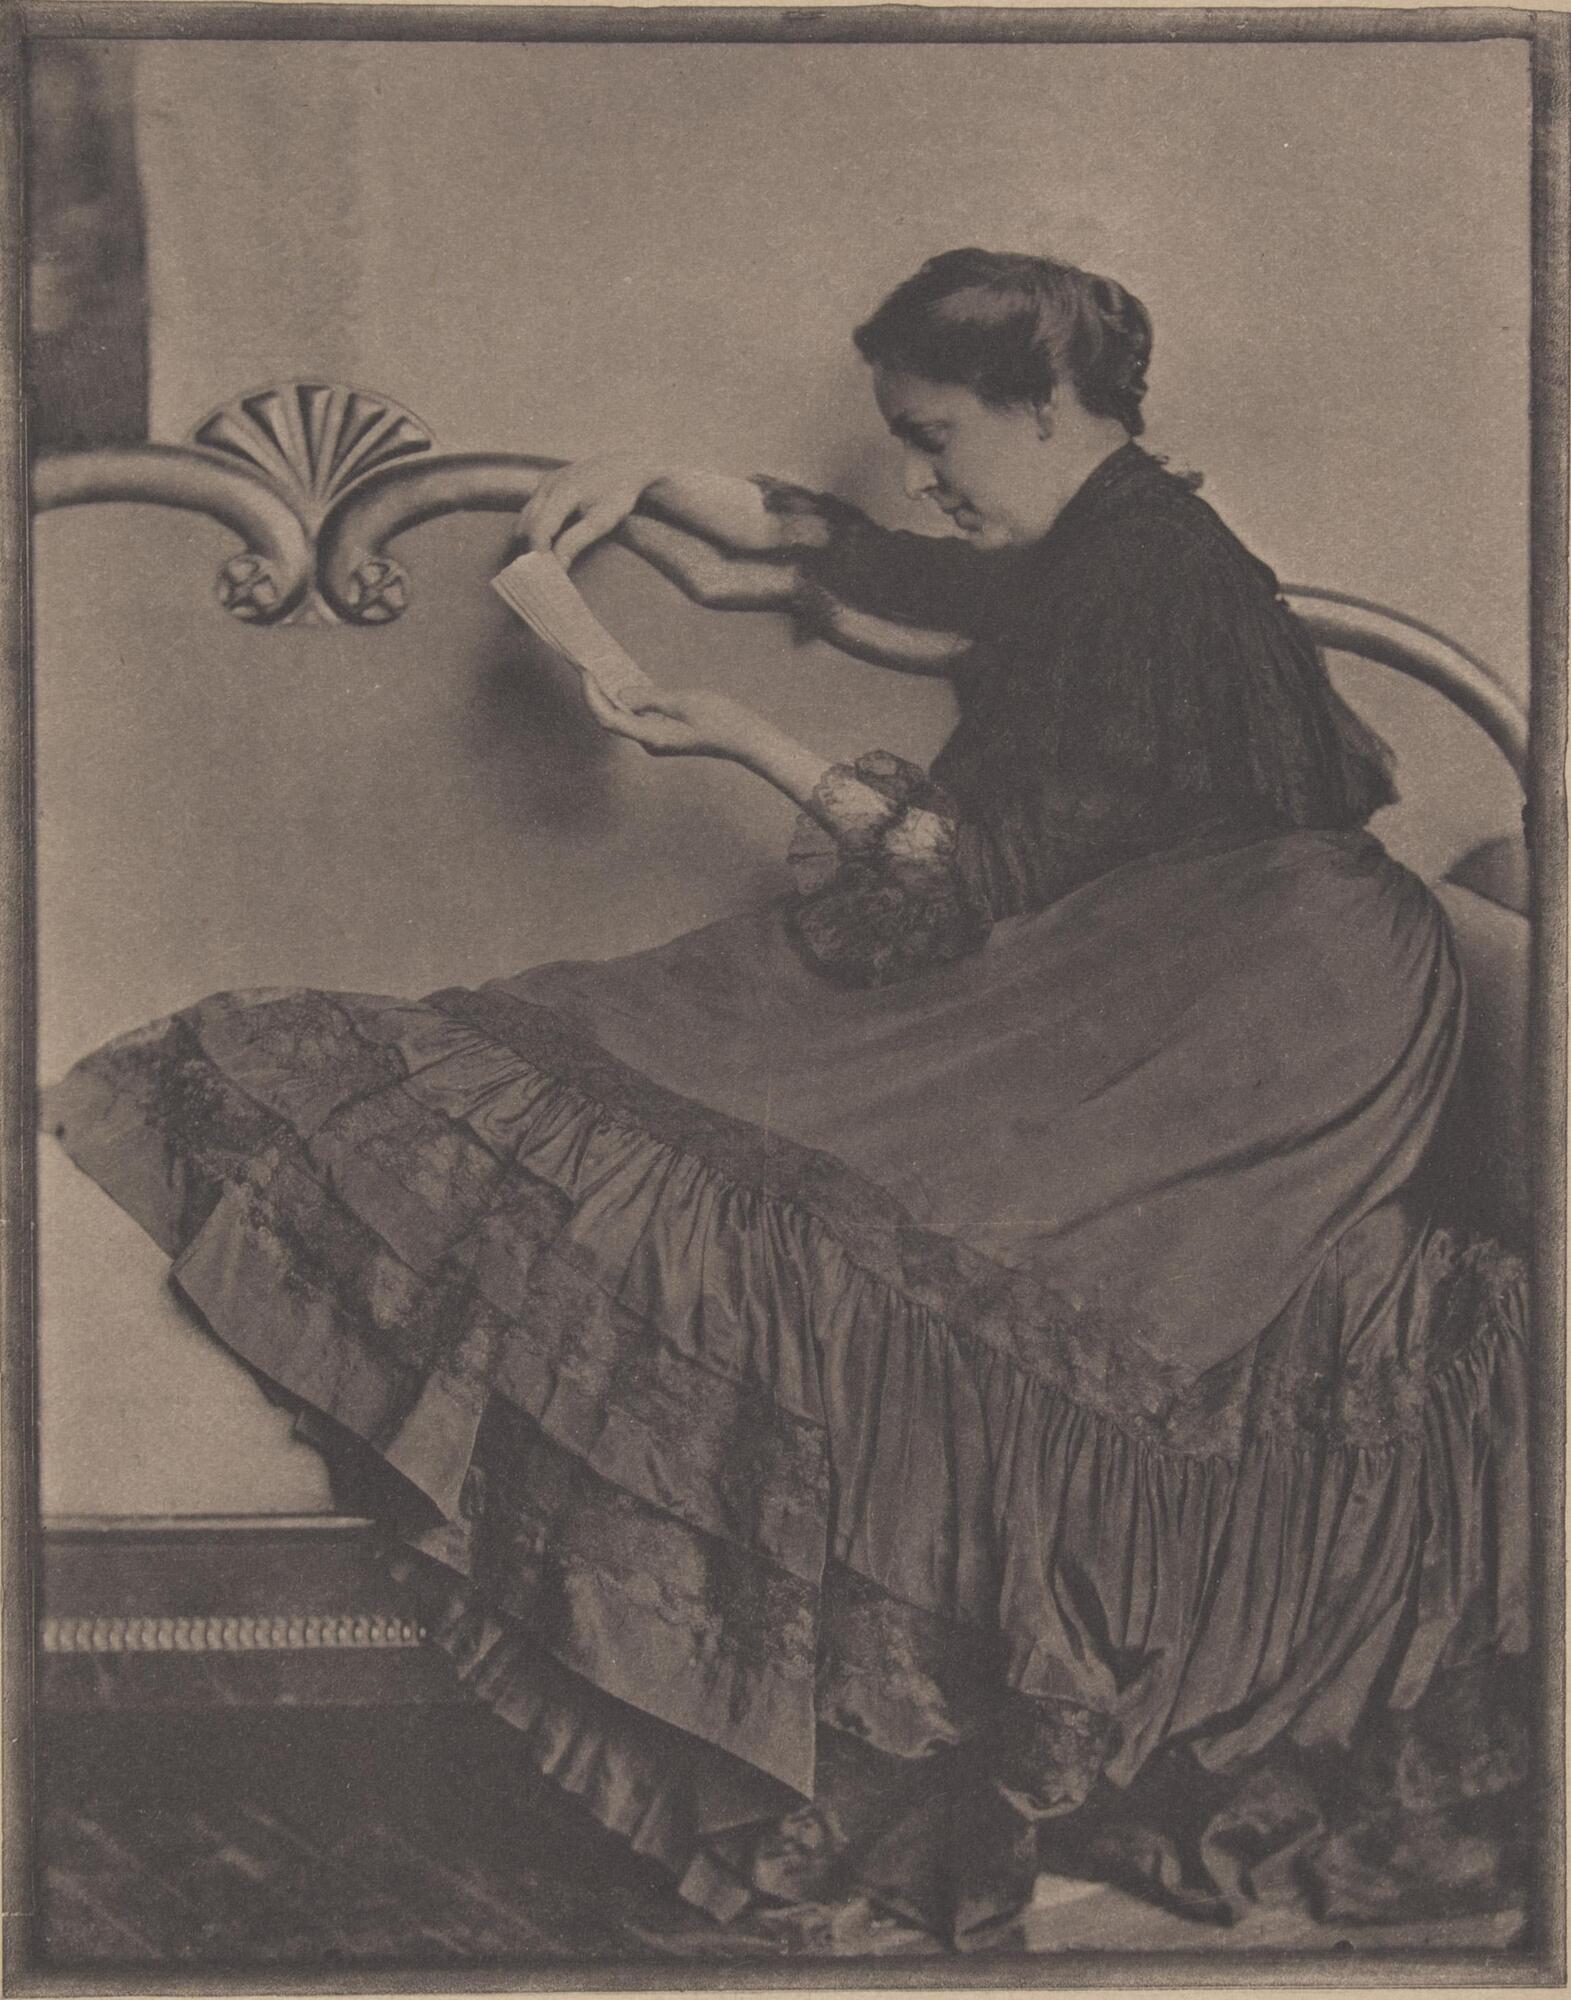 This image depicts a woman in a dress with a large skirt. She lounges on a couch and looks at a book. 